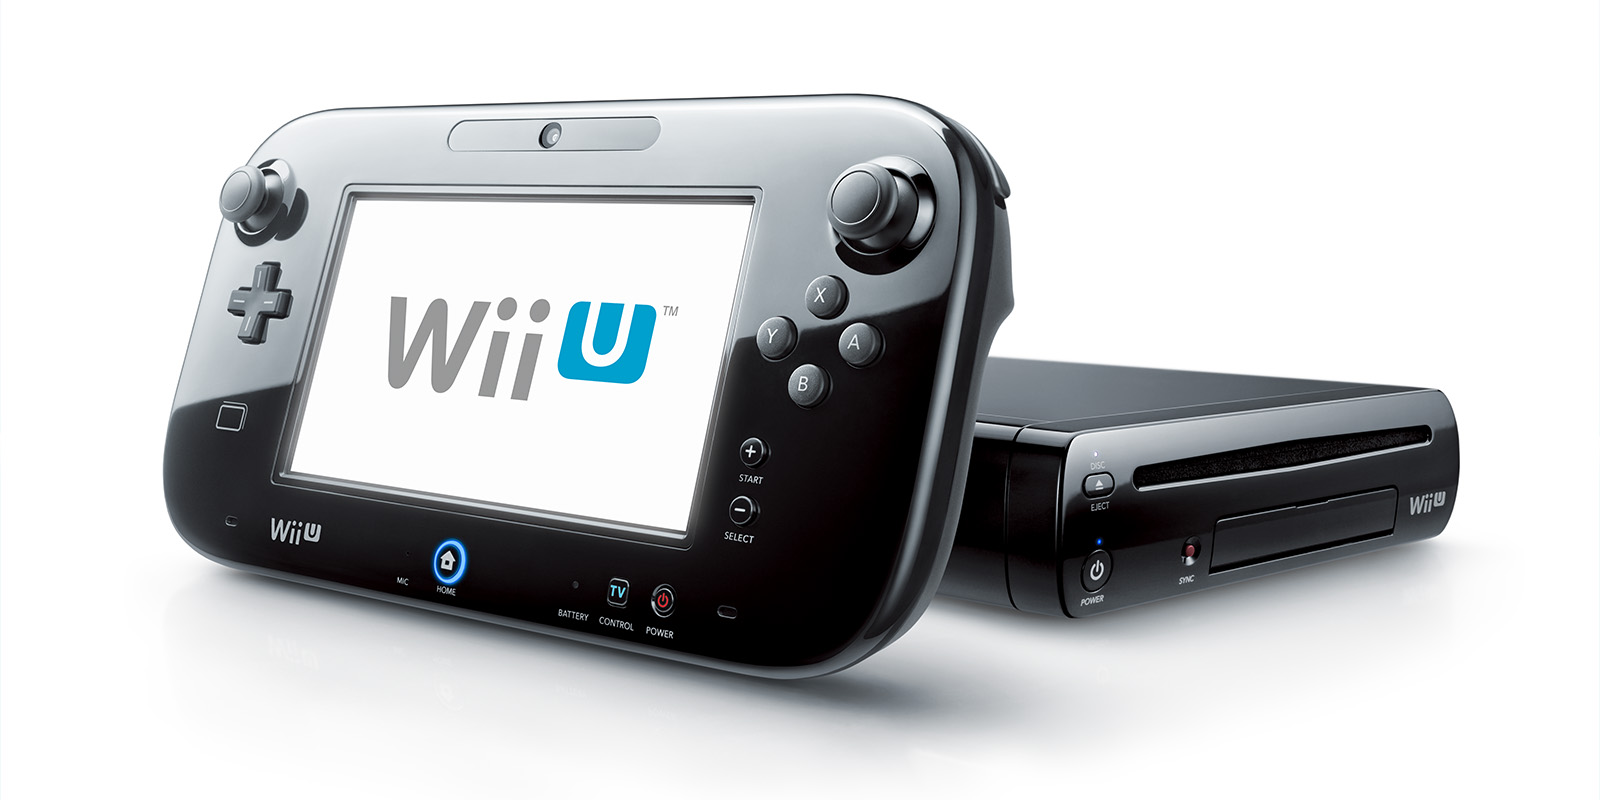 NERD Enables Wii Games on the Wii U eShop